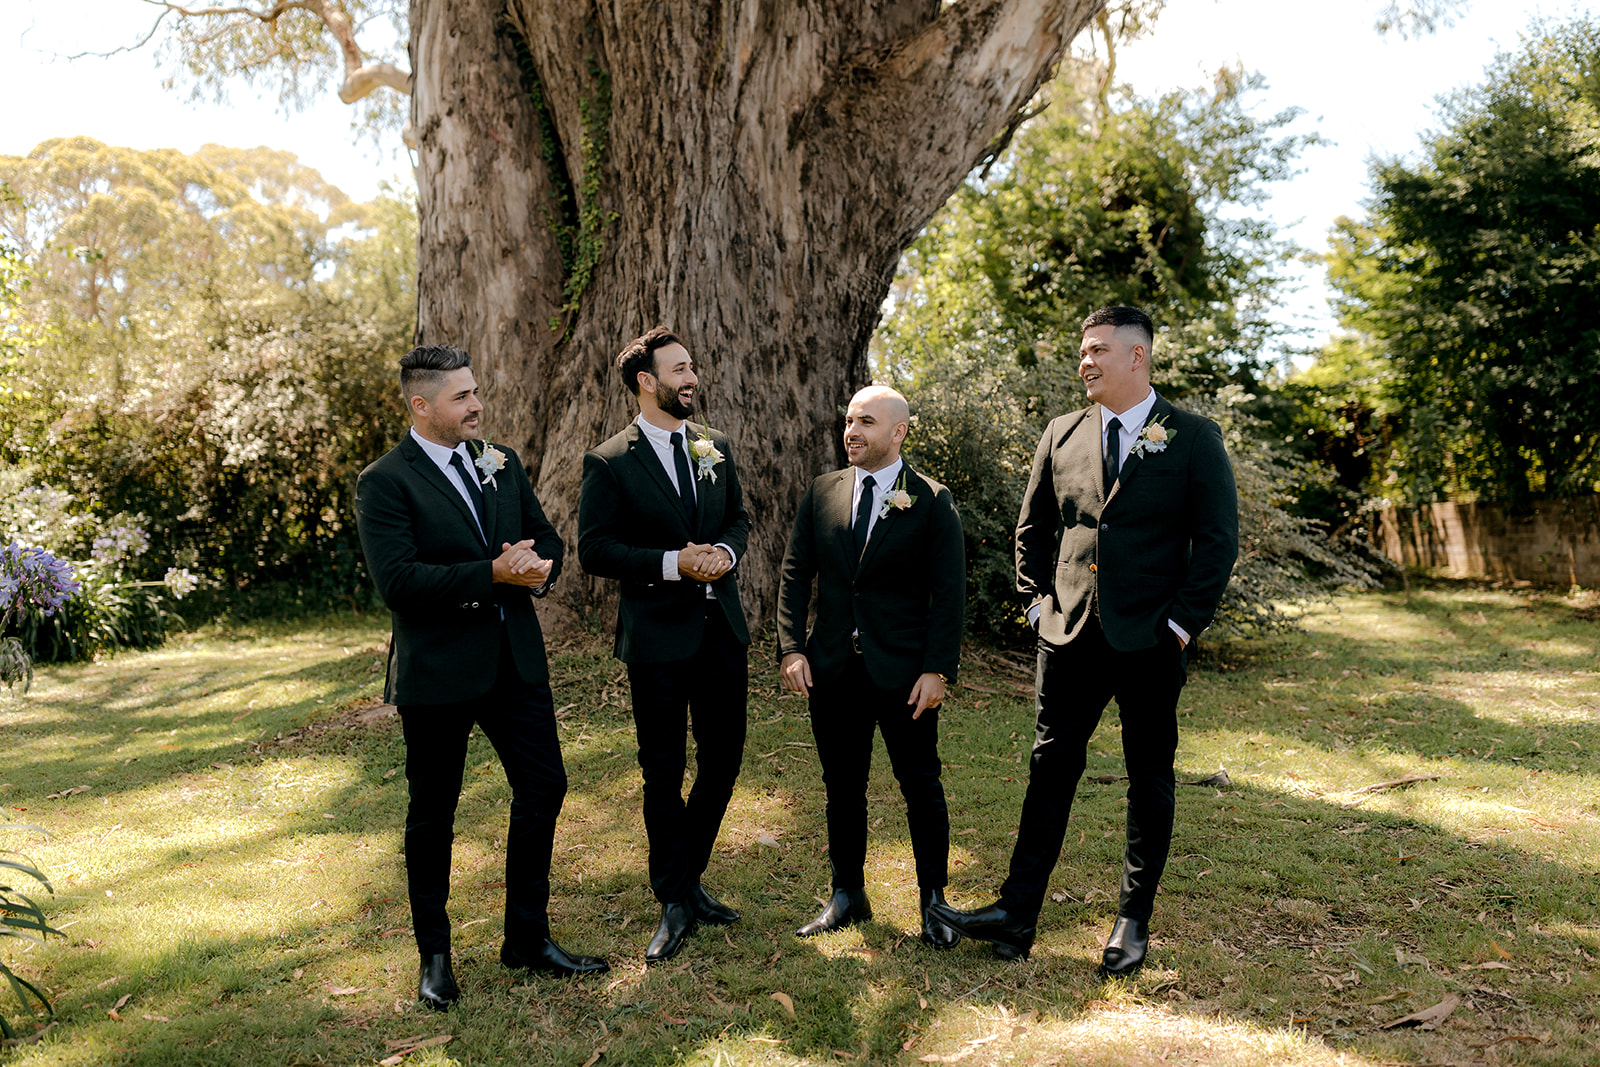 Groom with his groomsmen at his elegant country wedding.